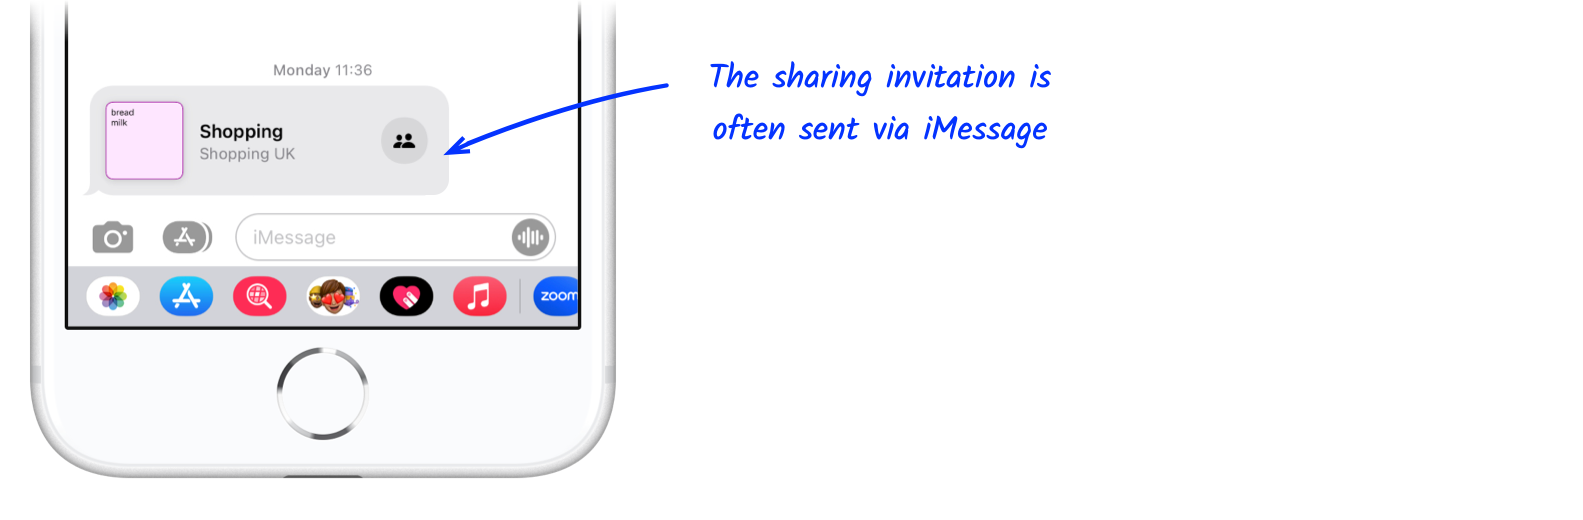 The sharing invitation is typically a message